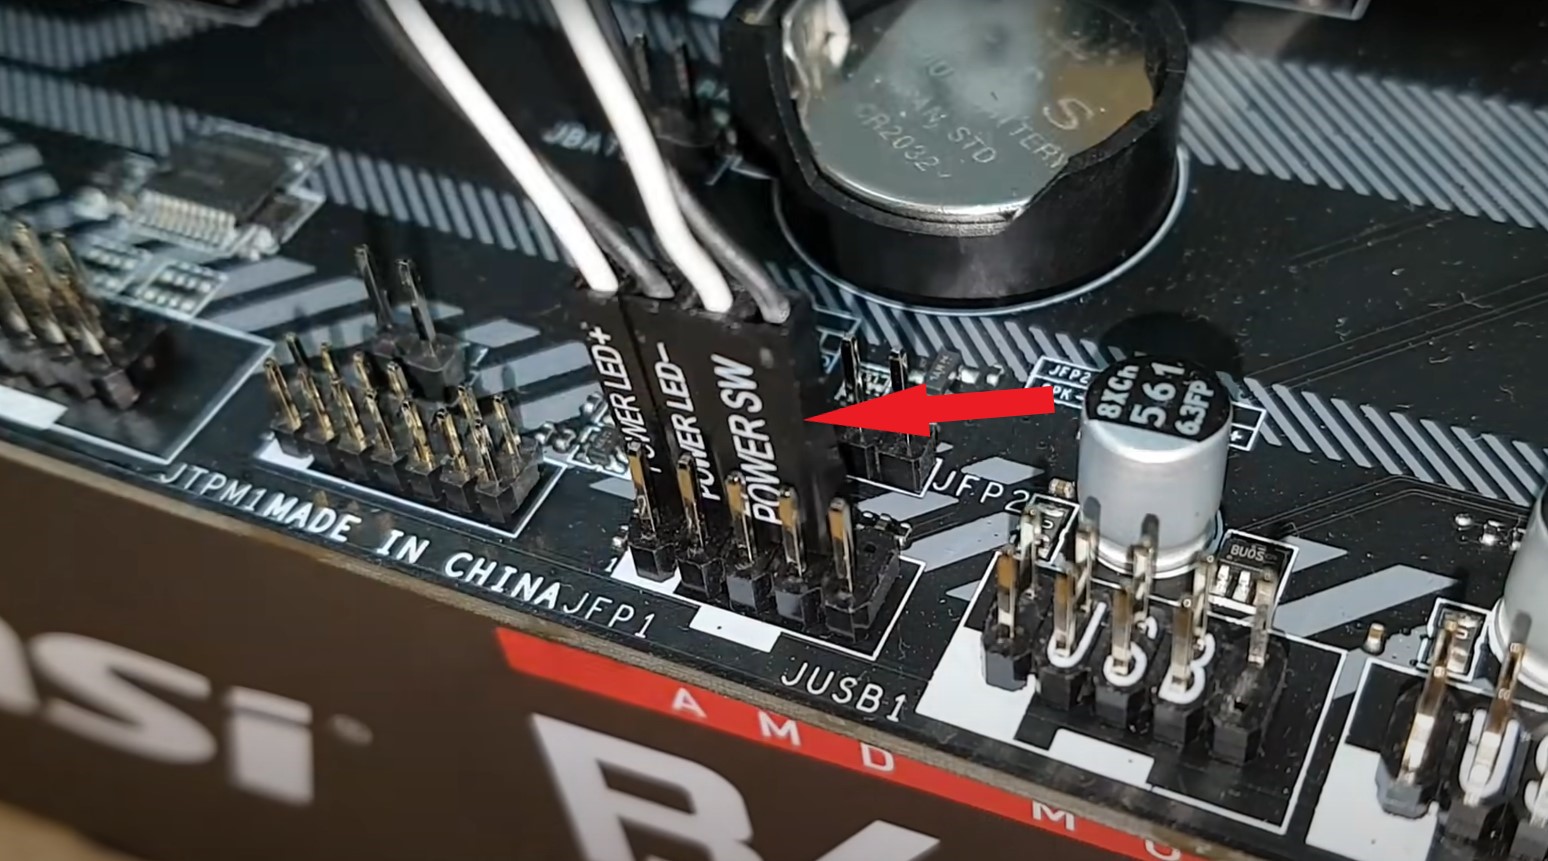 How To Connect The Power Button To Motherboard